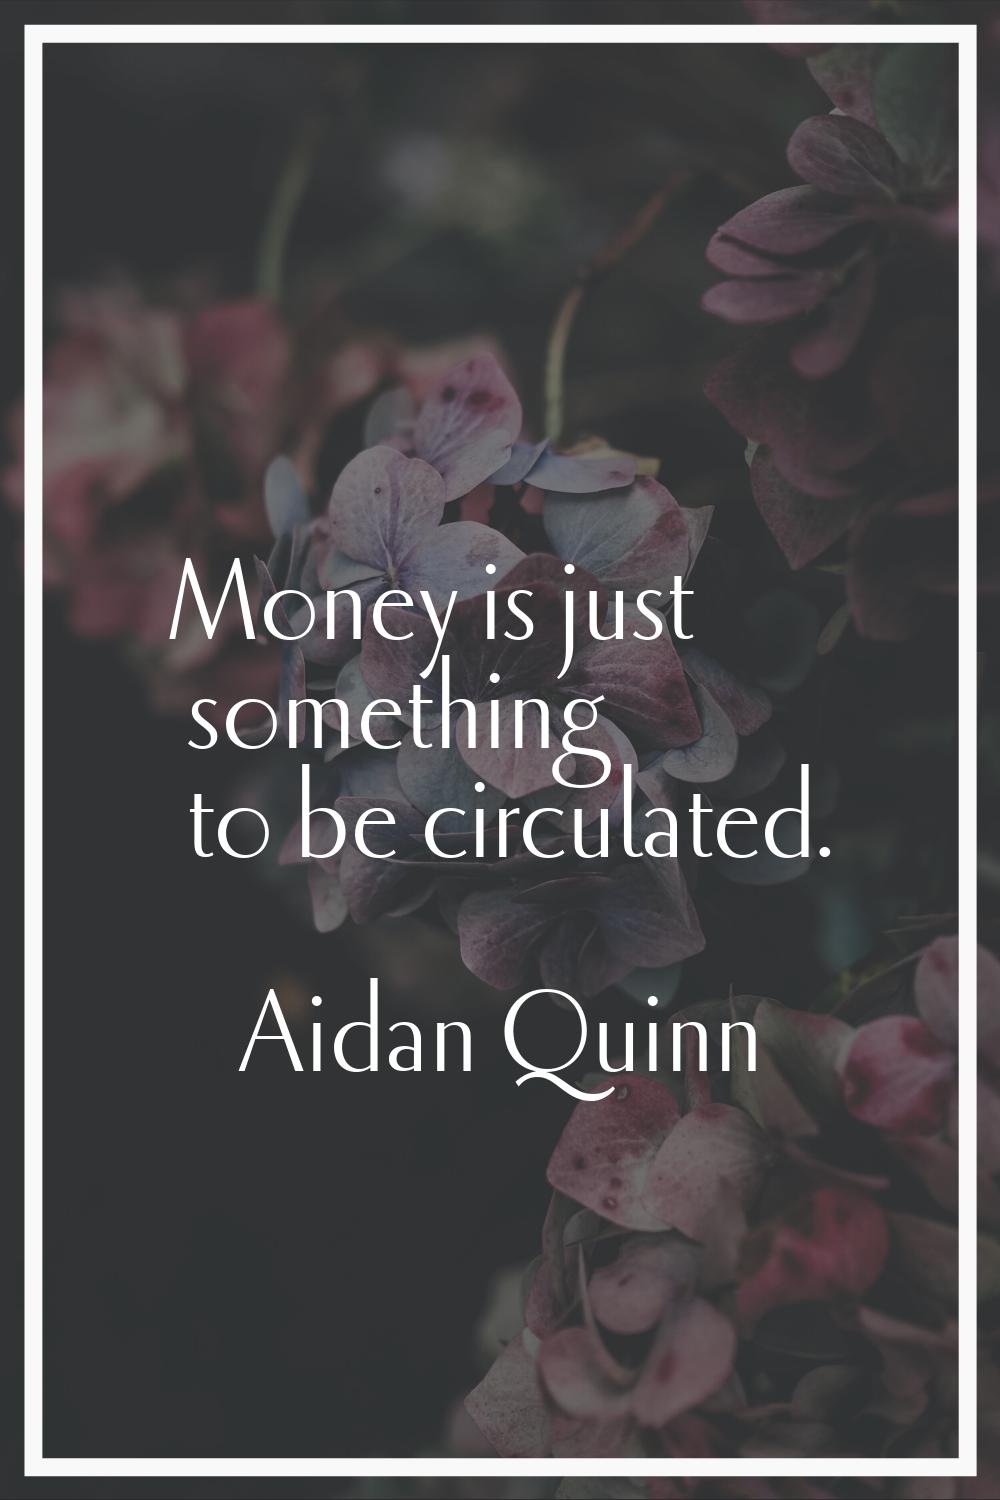 Money is just something to be circulated.